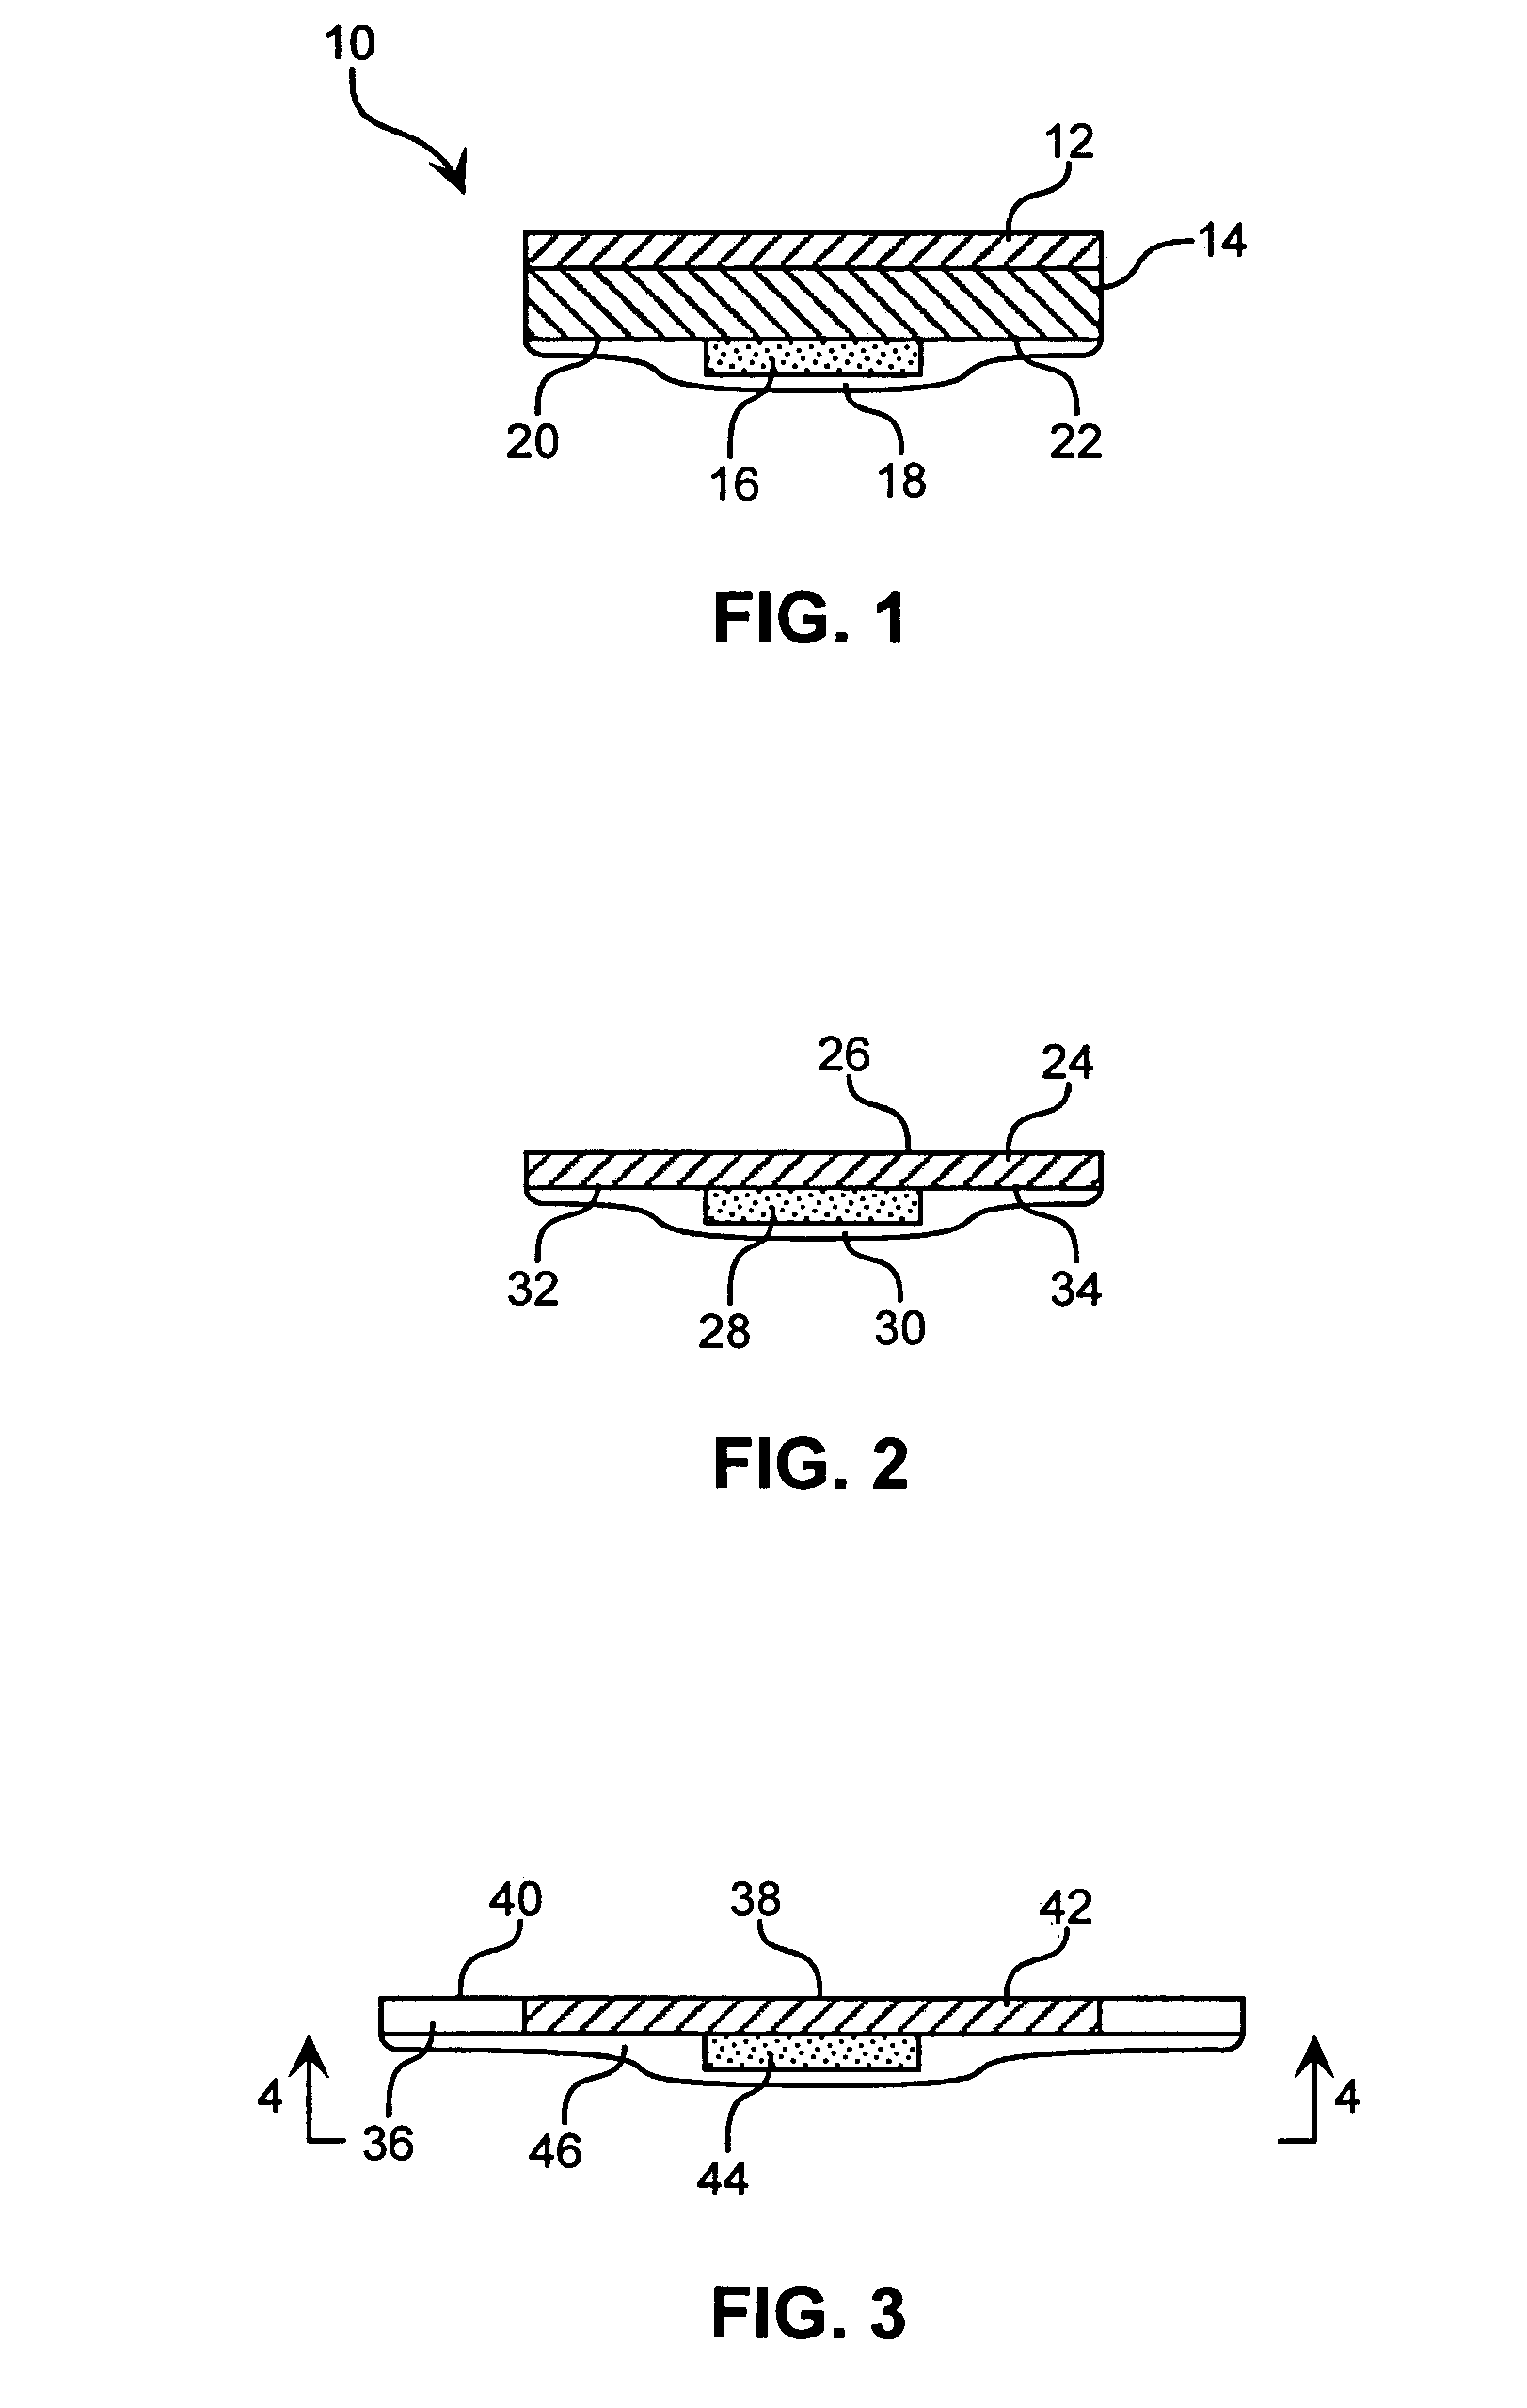 Method for preparing a two-phase water-absorbent bioadhesive composition